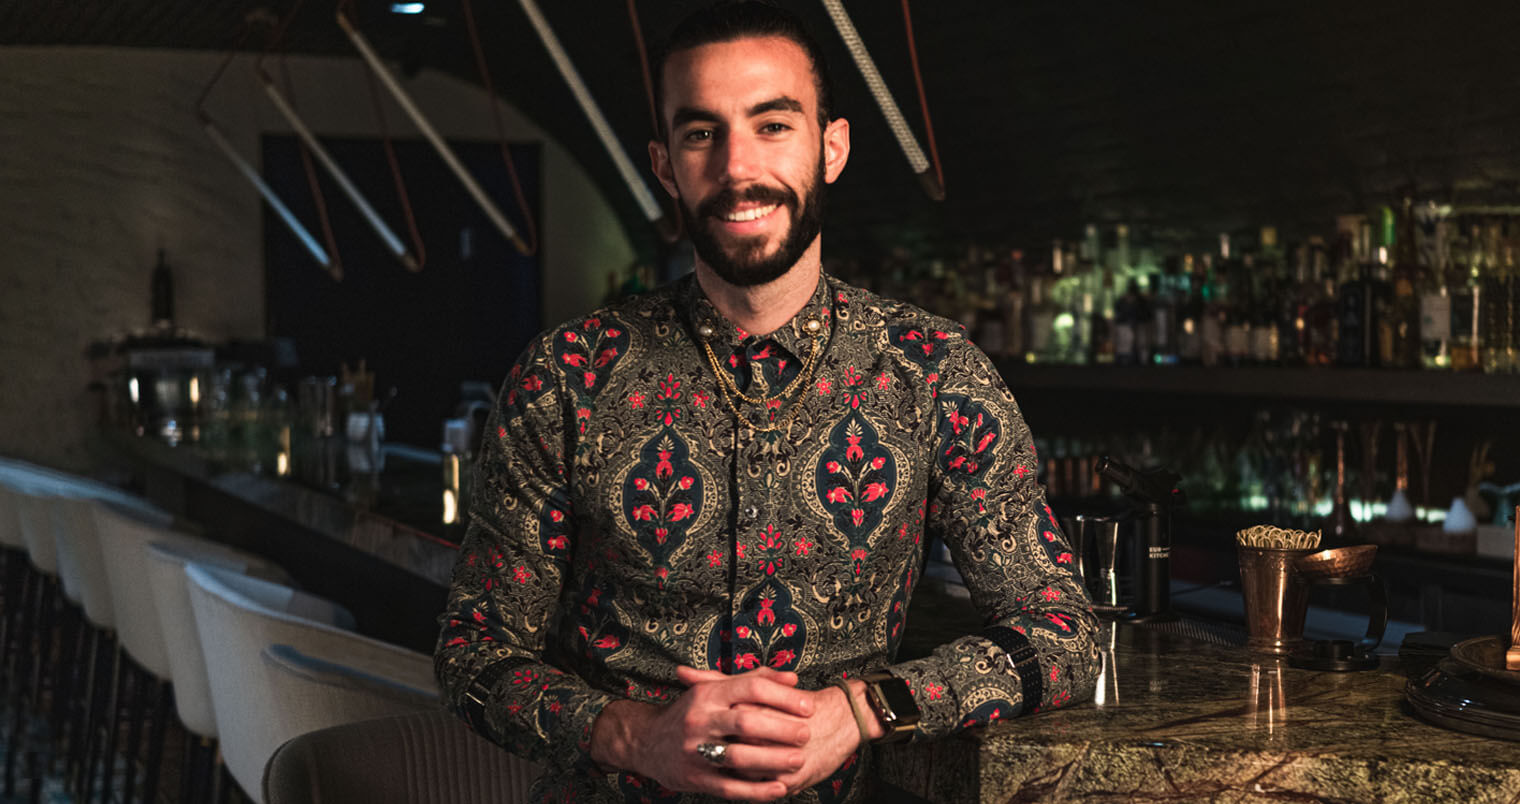 Jeremy LeBlanche of Thyme Bar, featured image